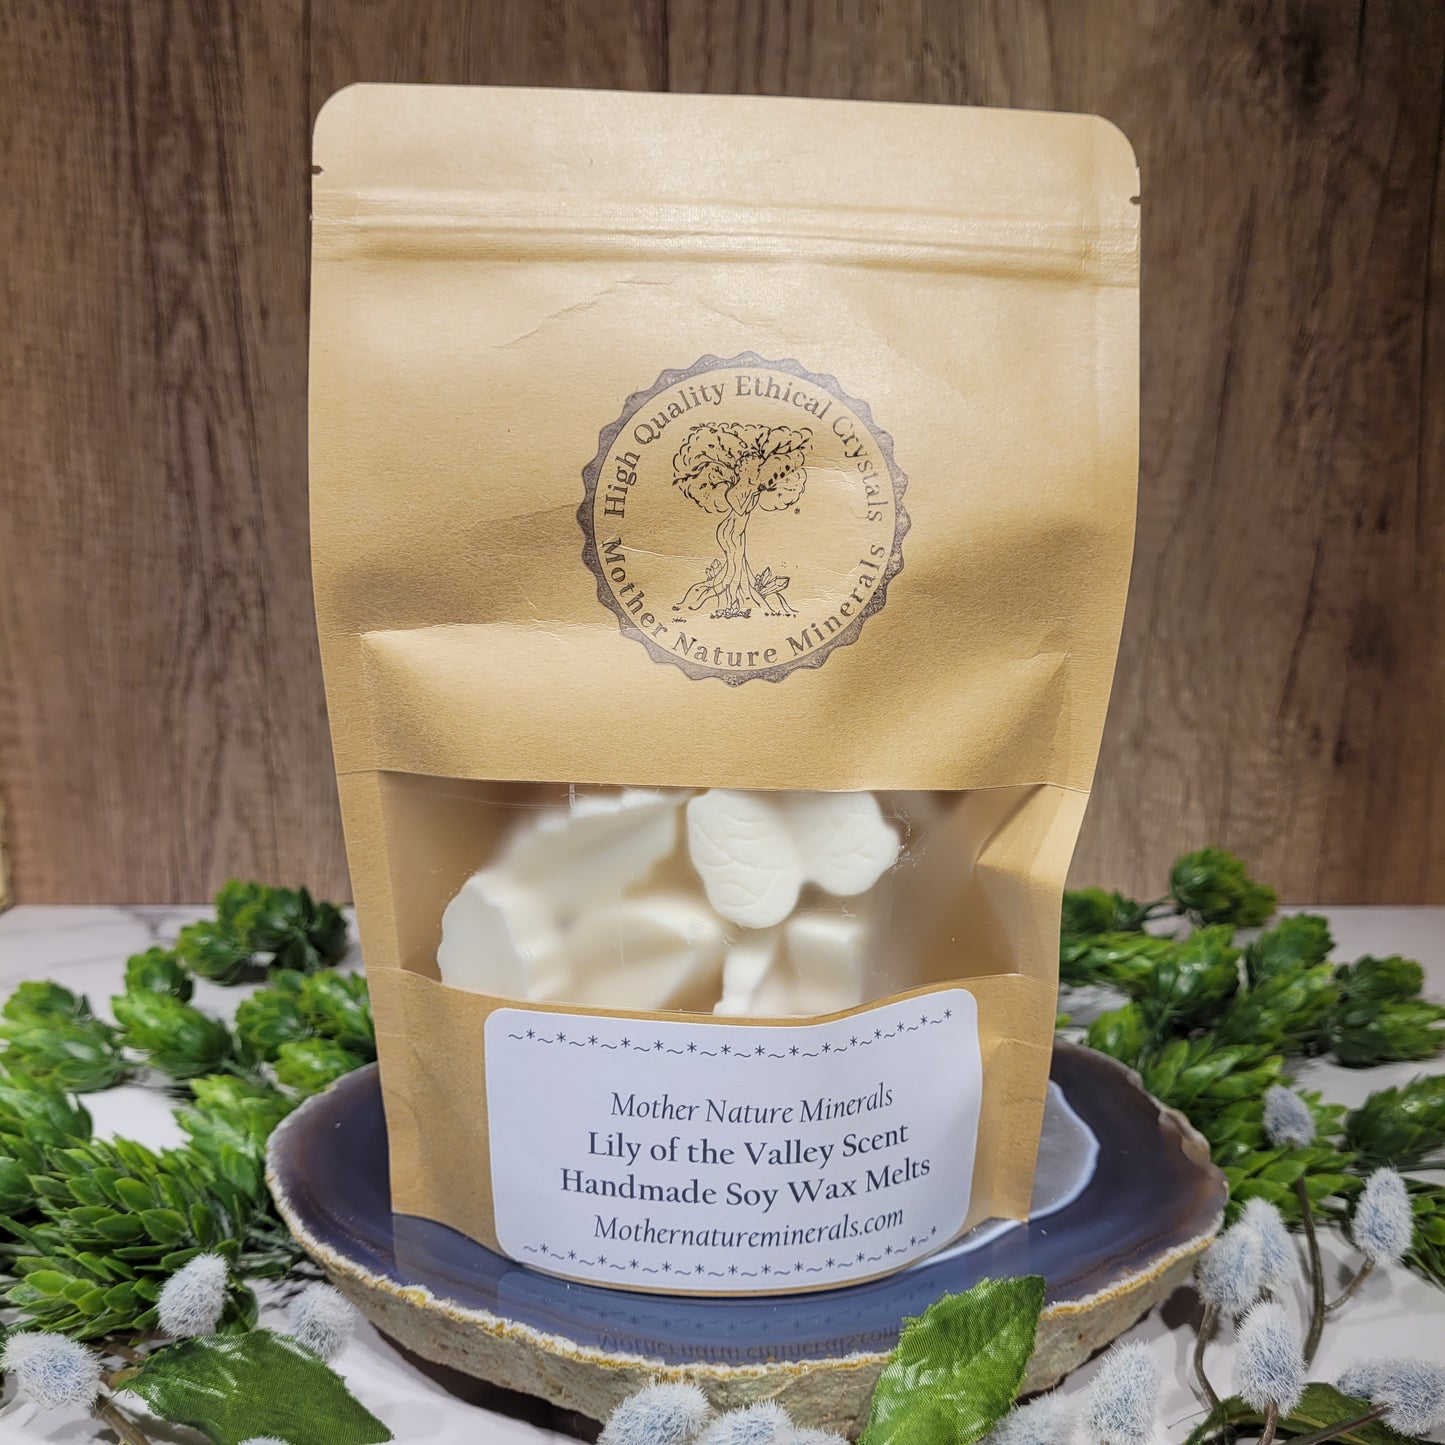 Lily of the Valley Soy Wax Melt Bag